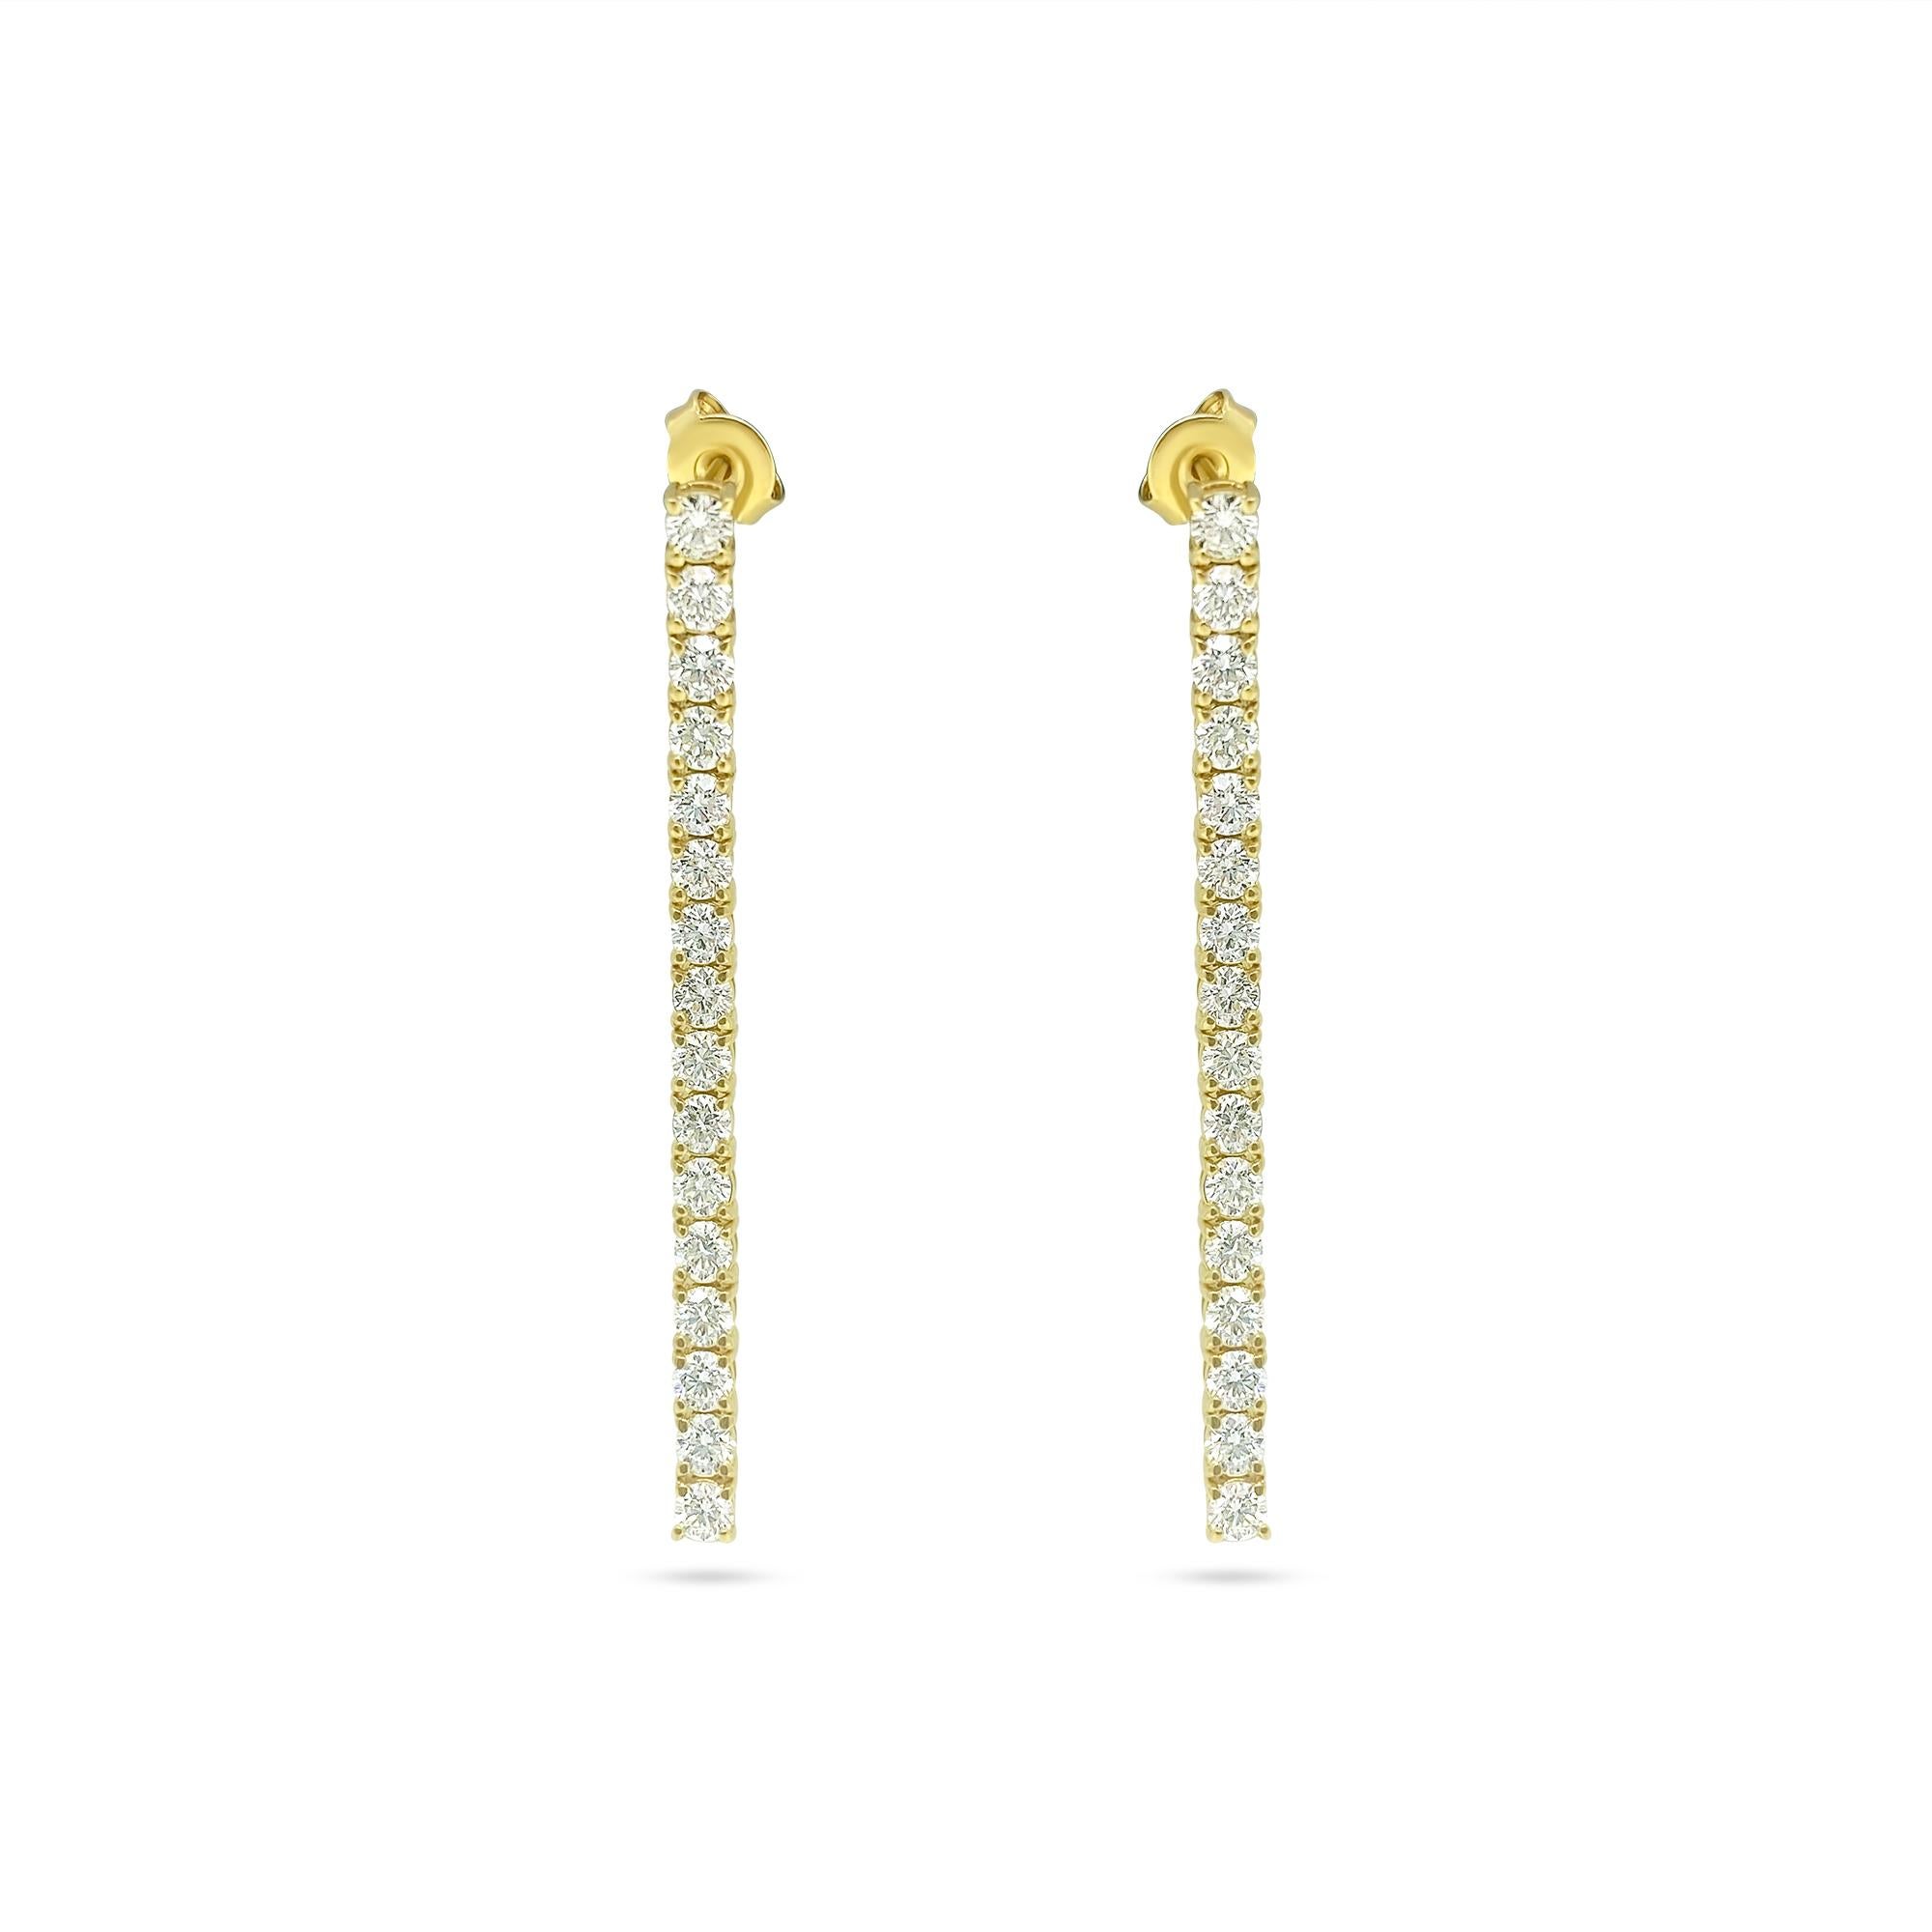 Crafted from 14-karat yellow gold, these stunning earrings boast a total diamond weight of 3.50 carats, showcasing exceptional clarity (VVS) and an H color grade. Each diamond is 100% natural, sourced from the earth, ensuring authenticity and